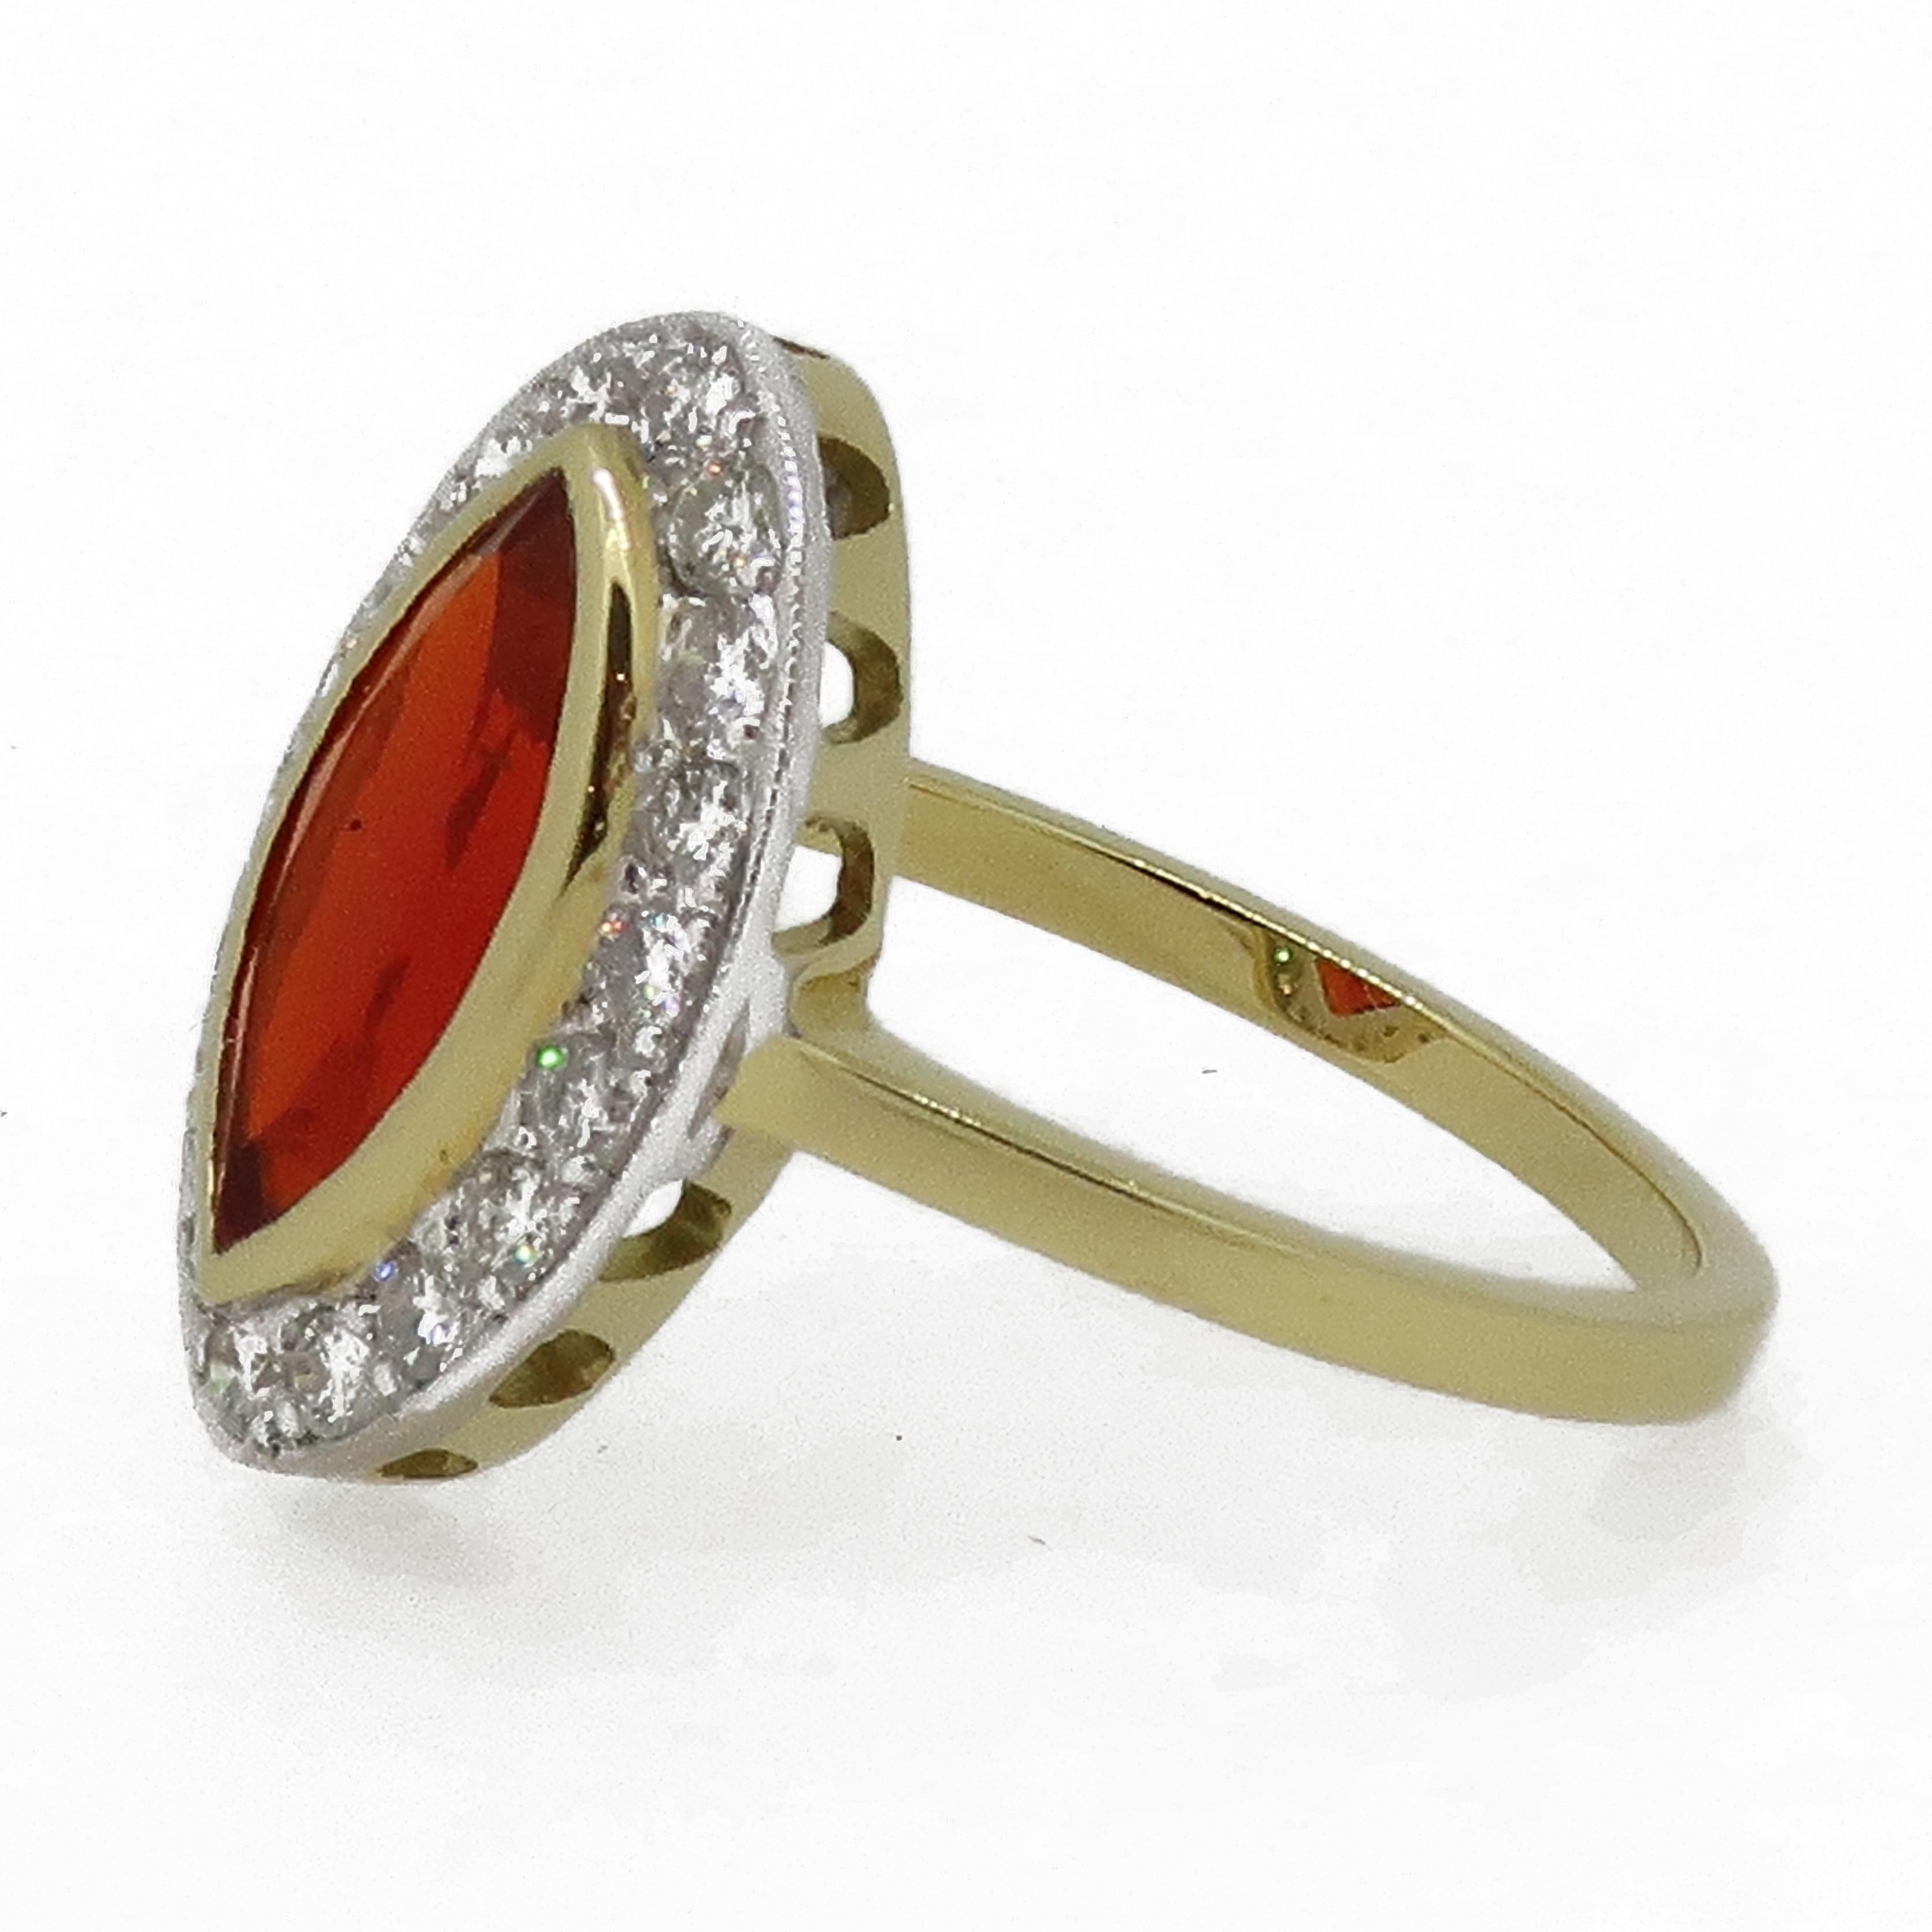 Marquise Fire Opal and Diamond Cluster Ring 18 Karat Yellow and White Gold

Stunning and classic marquise shaped fire opal weighing 1.06ct, encased in a fine yellow gold bezel surrounded by white brilliant cut diamonds. All diamonds are set in a